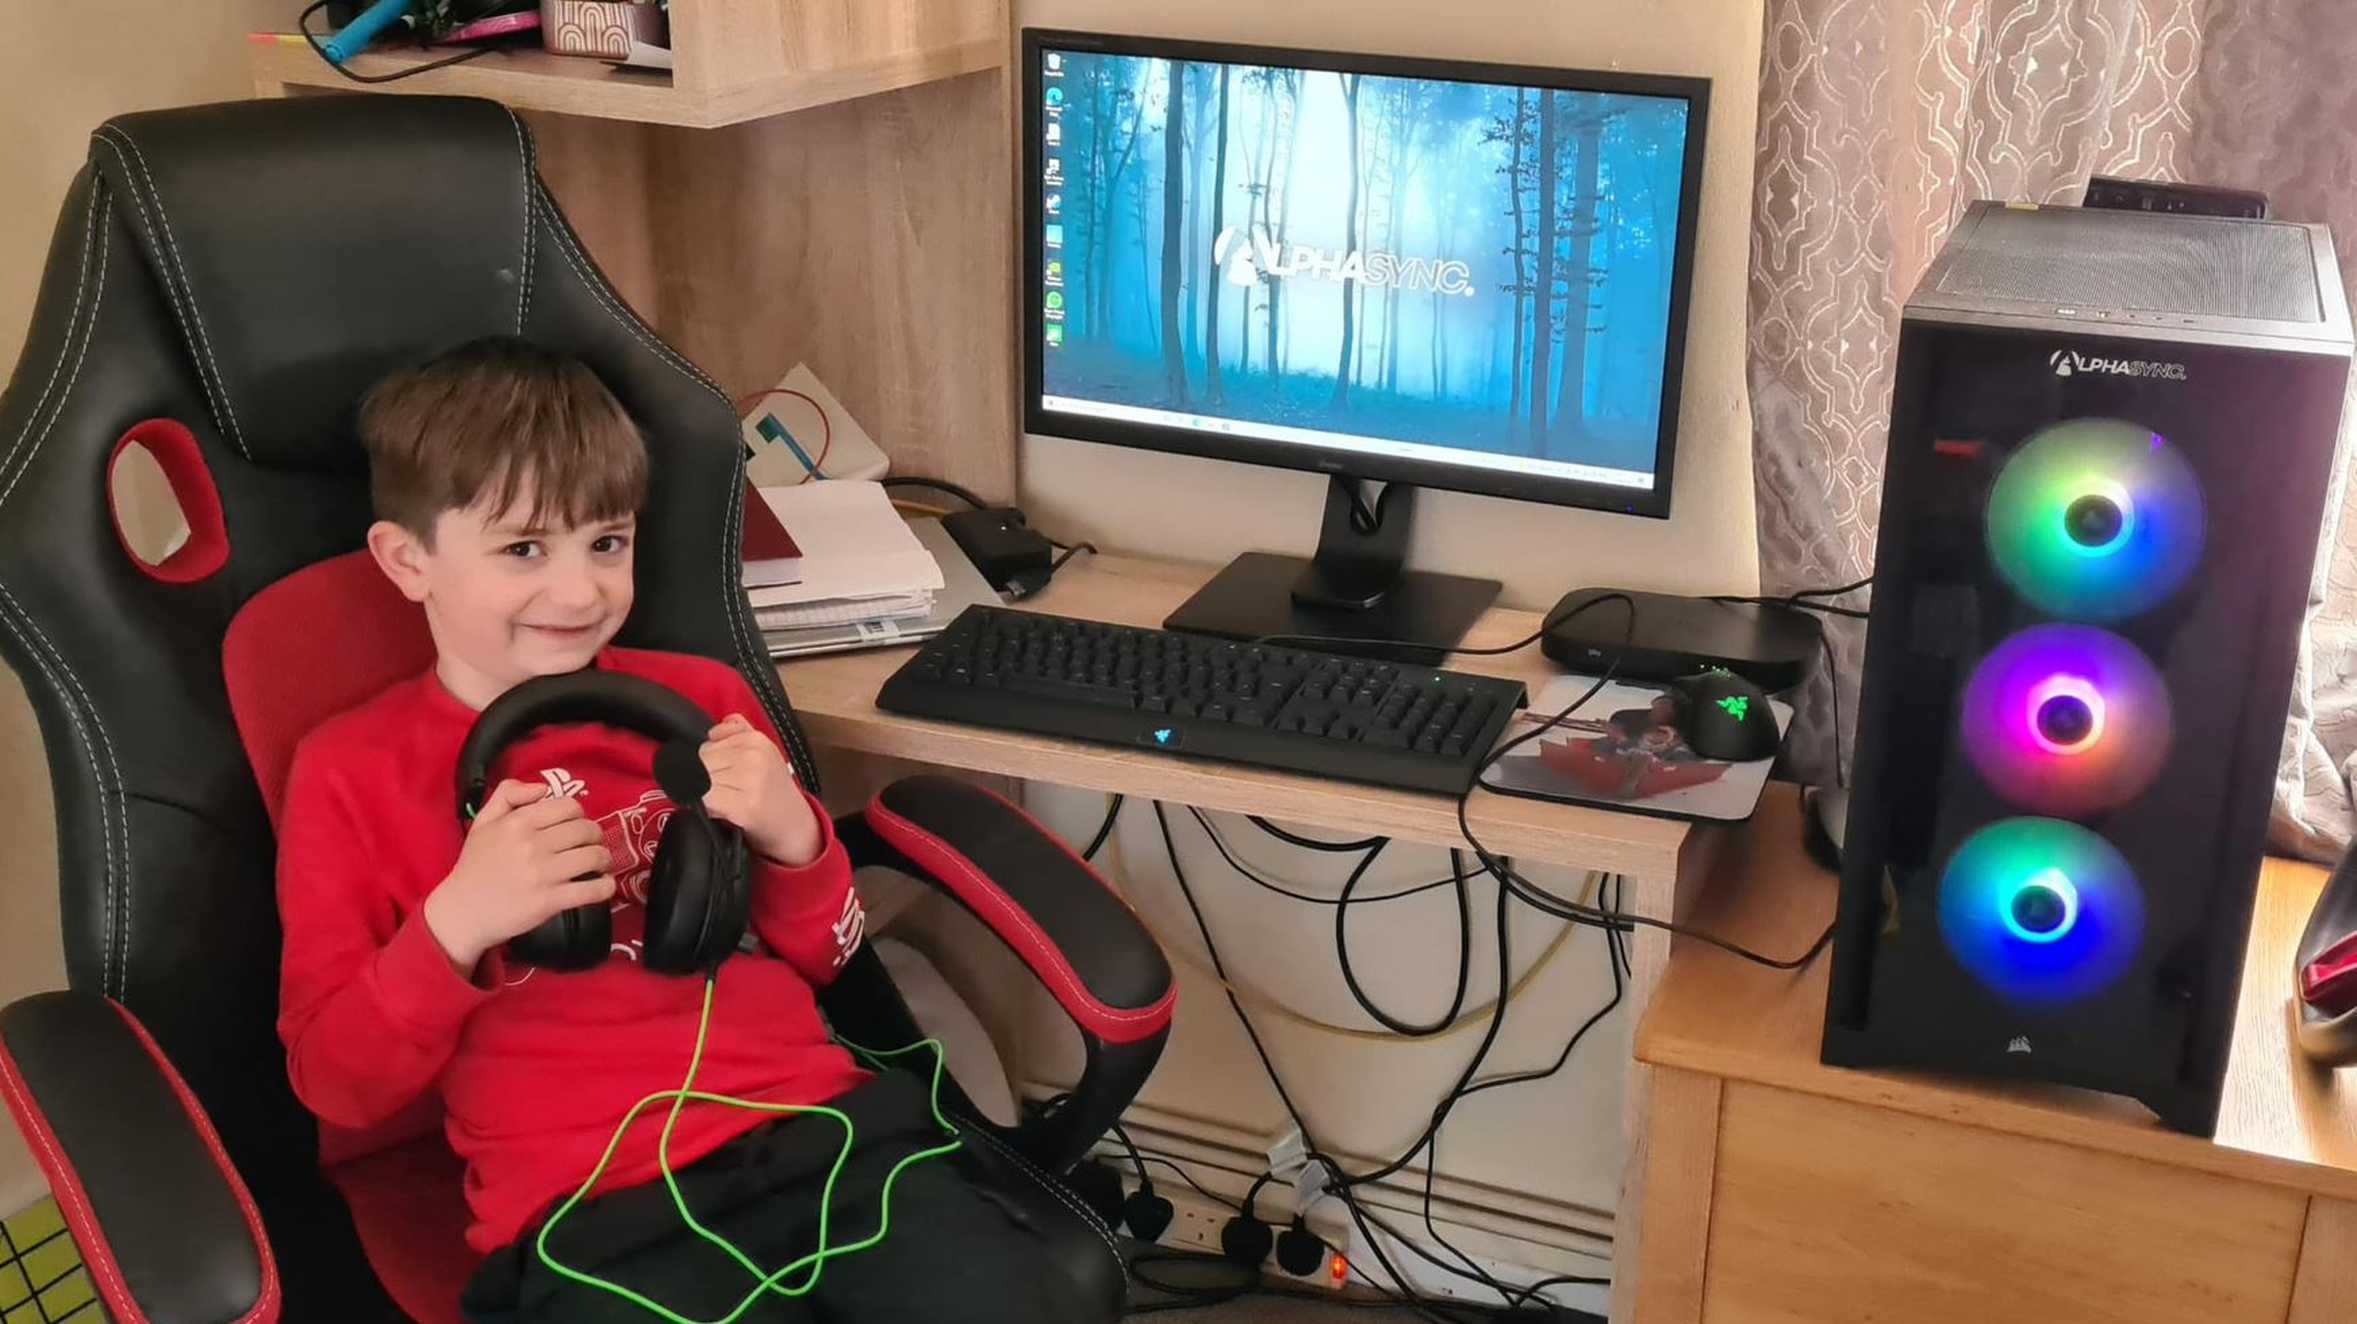 Aiden with his new gaming PC.